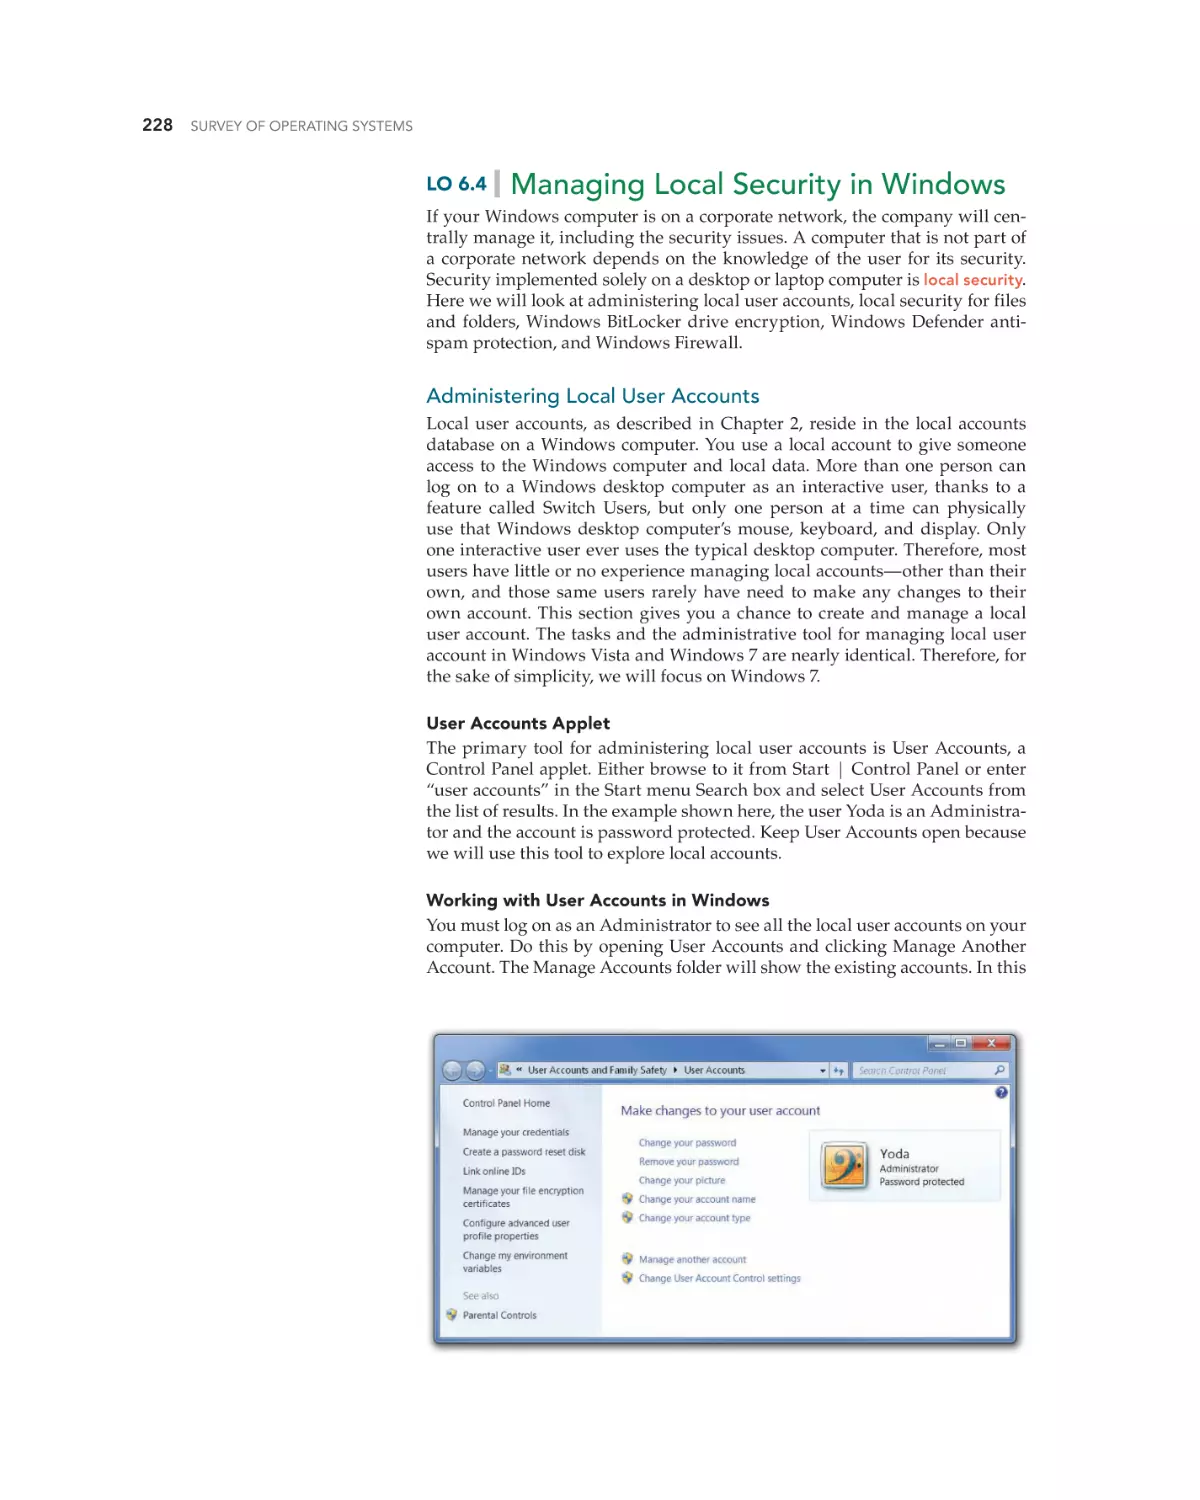 Managing Local Security in Windows
Administering Local User Accounts